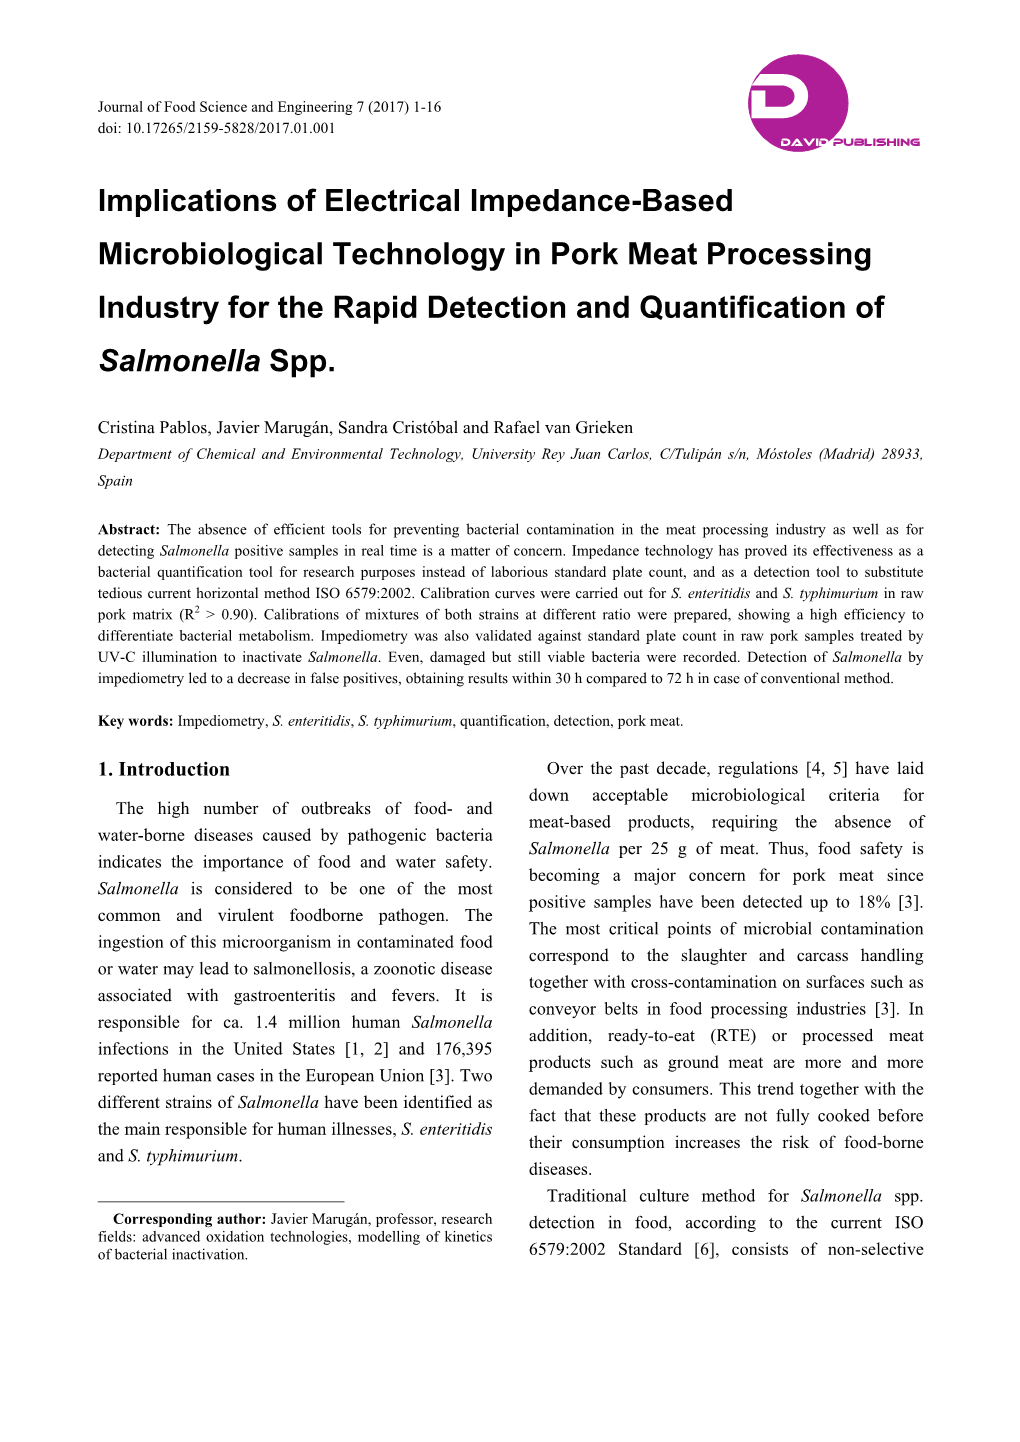 Implications of Electrical Impedance-Based Microbiological Technology in Pork Meat Processing Industry for the Rapid Detection and Quantification of Salmonella Spp